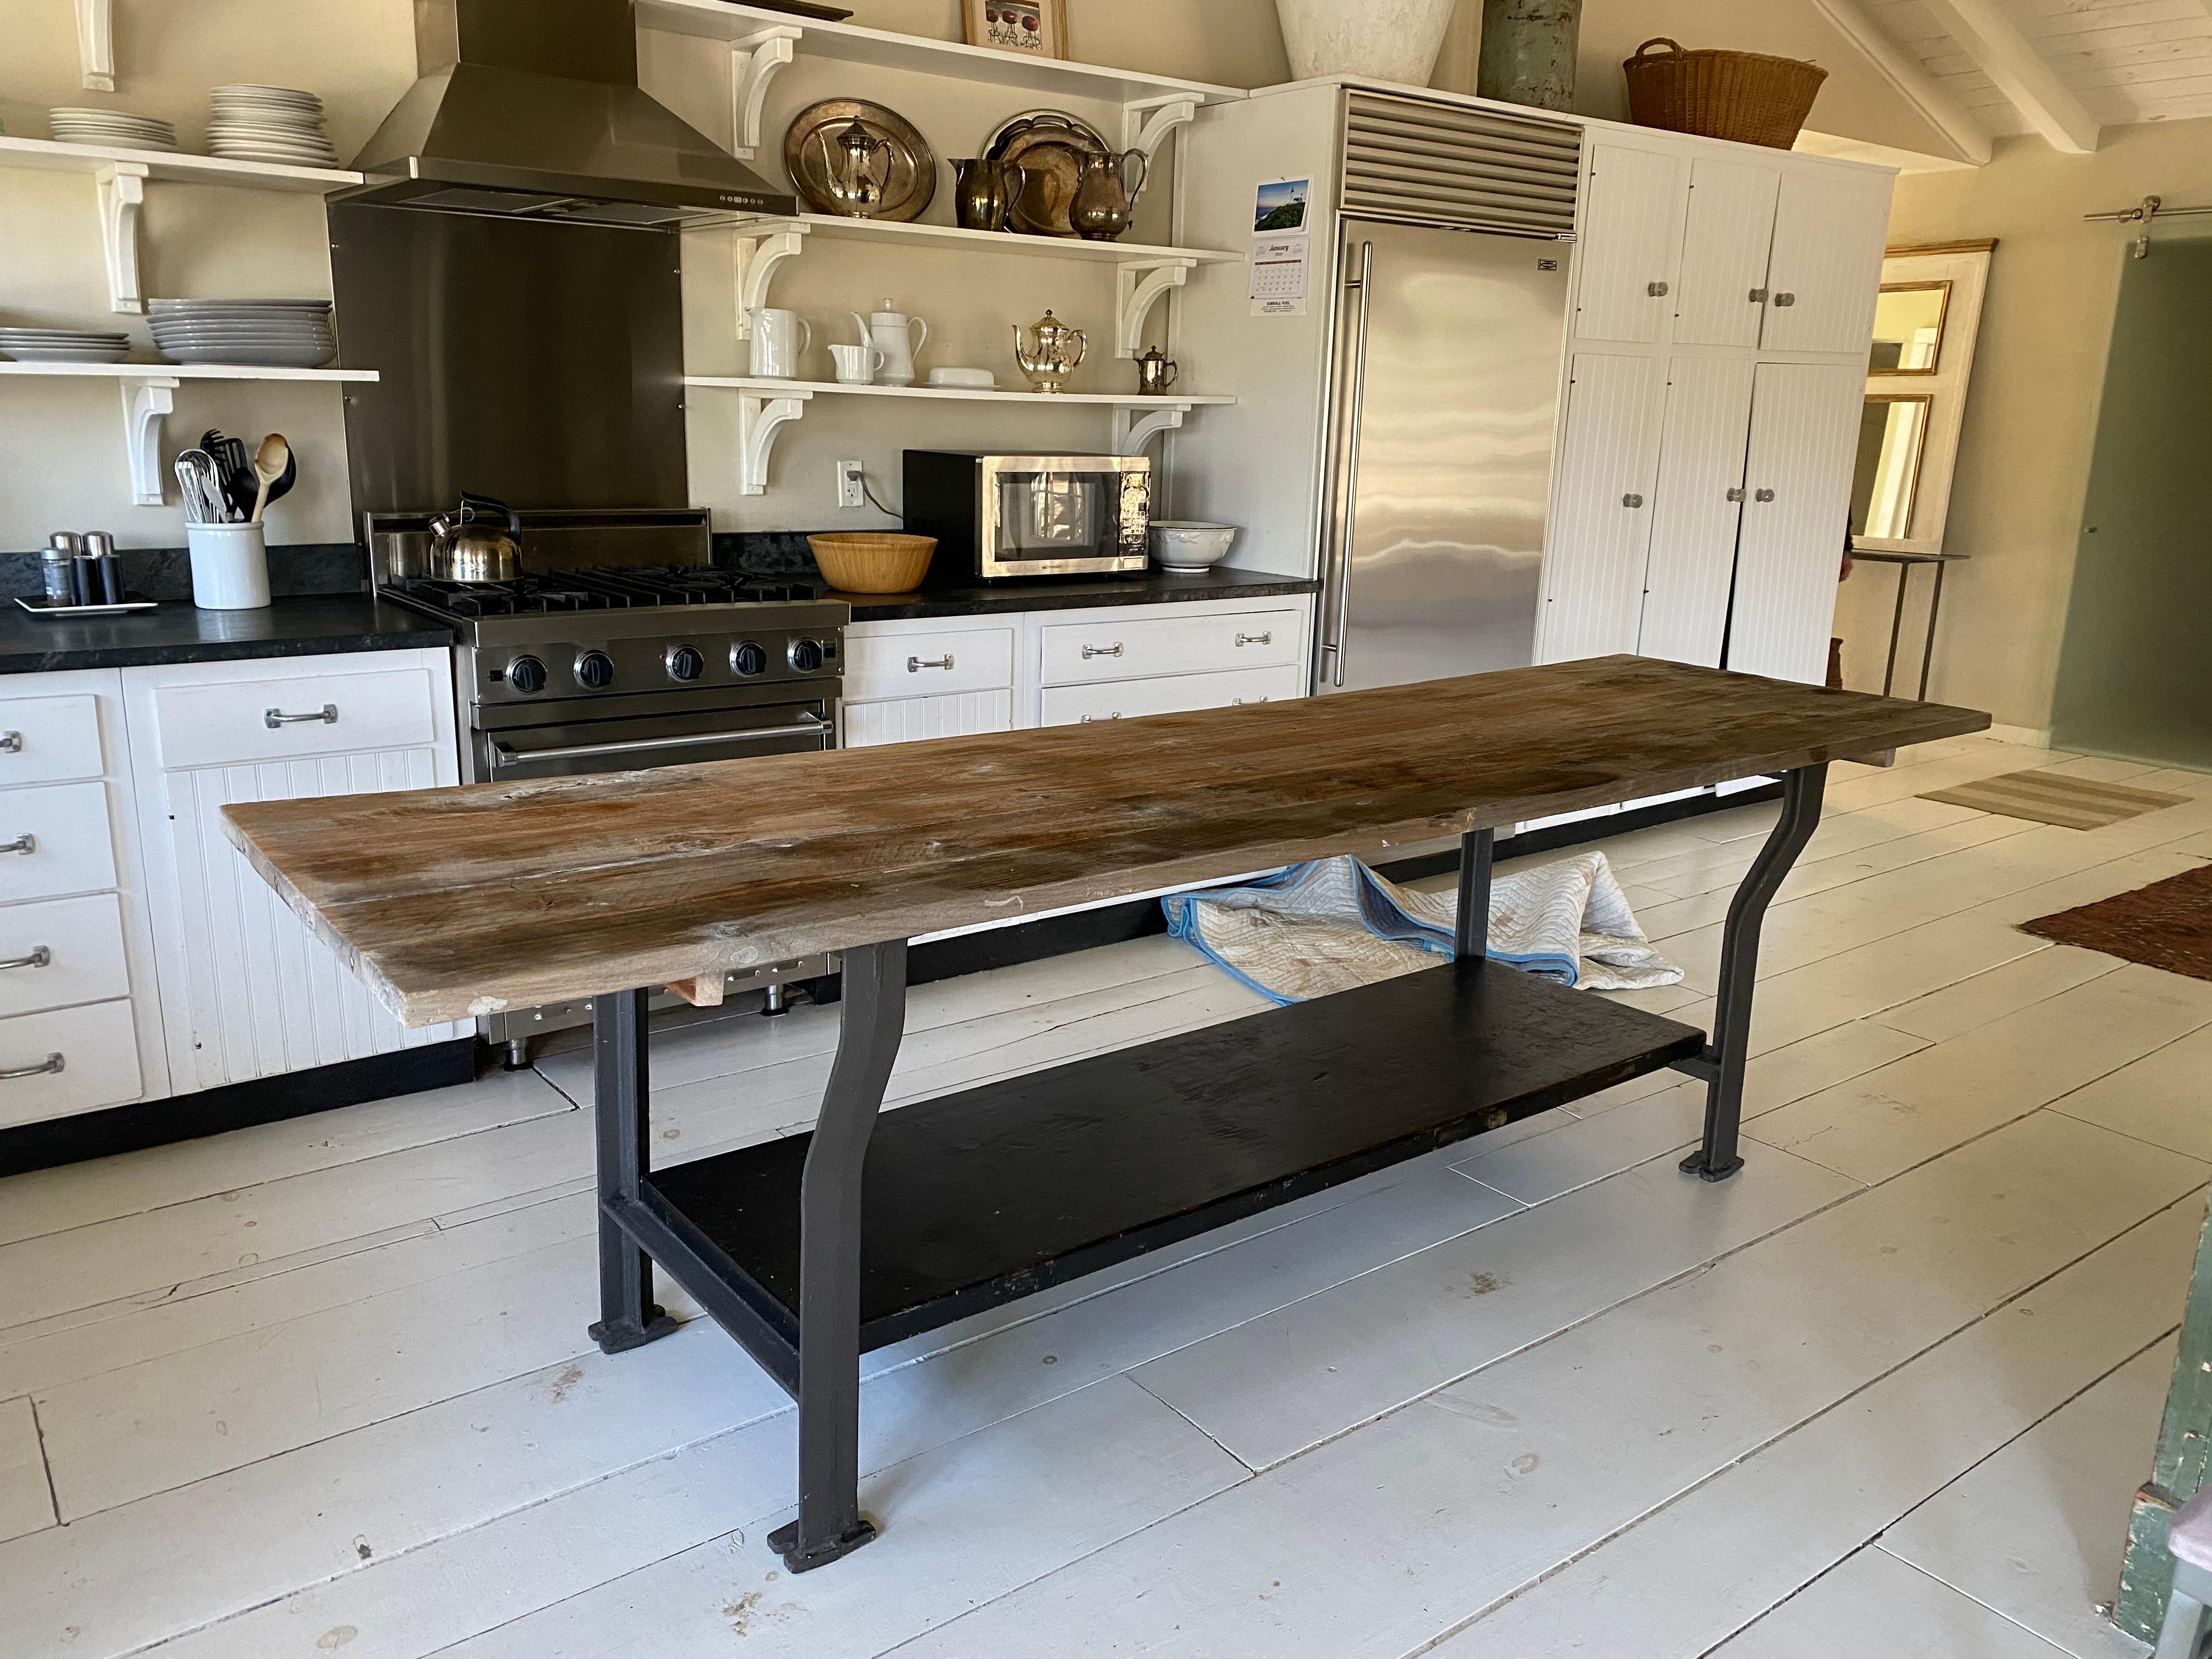 Reclaimed teak wood top industrial 9' harvest kitchen island great table. Its size and solidity is perfect to be used for kitchen work table, Kitchen Island, shop or workshop. Perfect also to be used for a store merchandise display table, restaurant